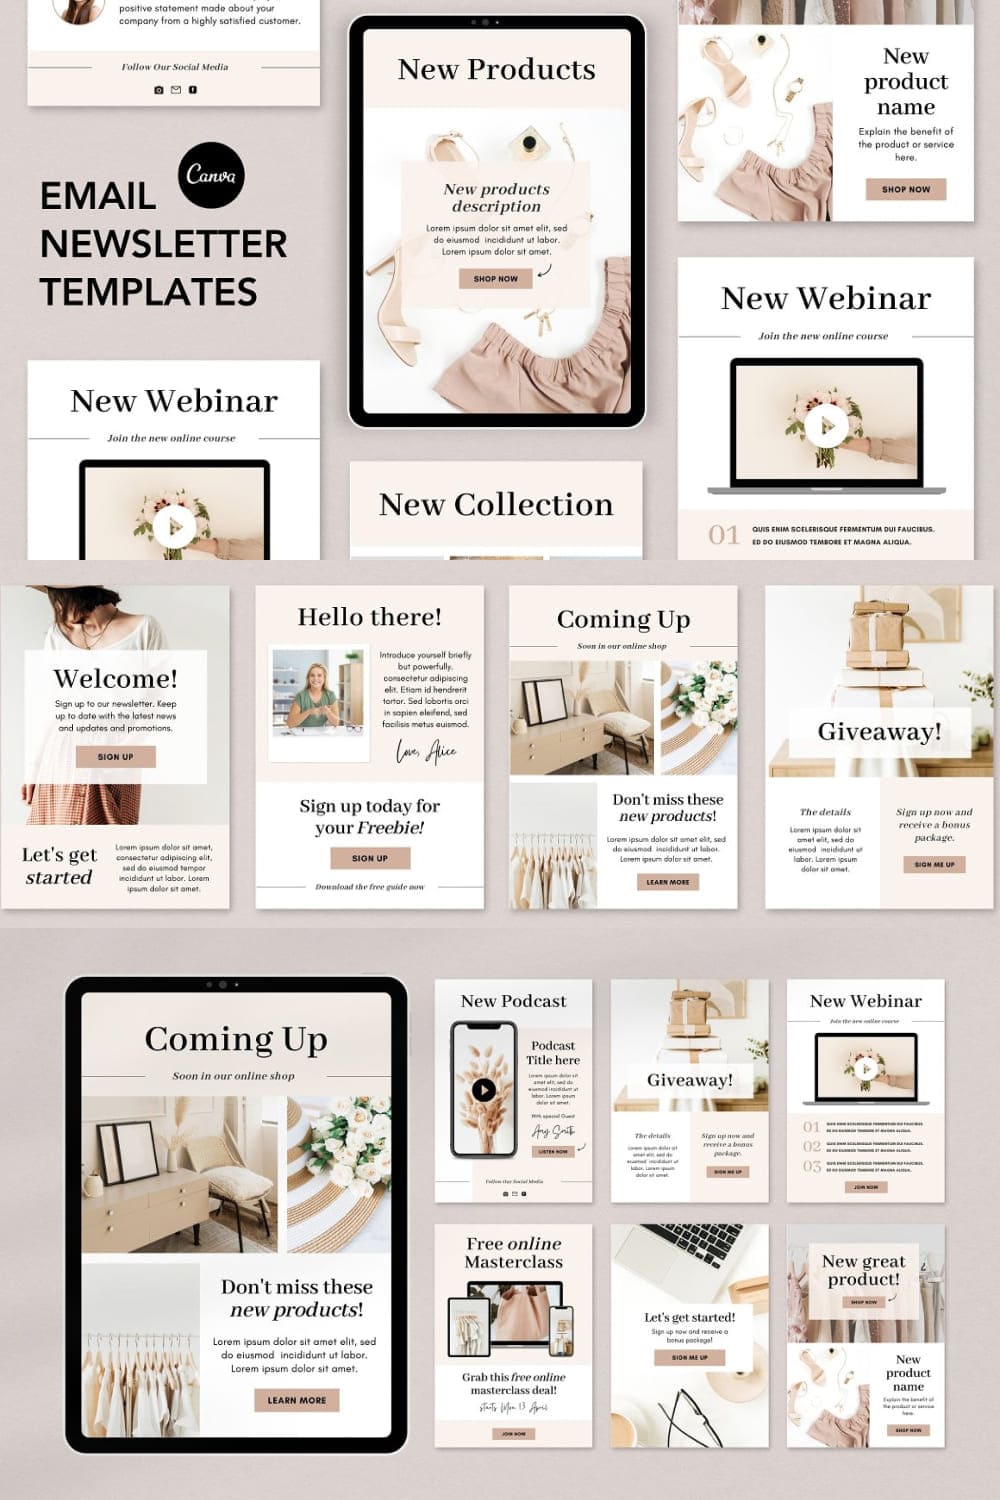 An image pack of a great email design templates.